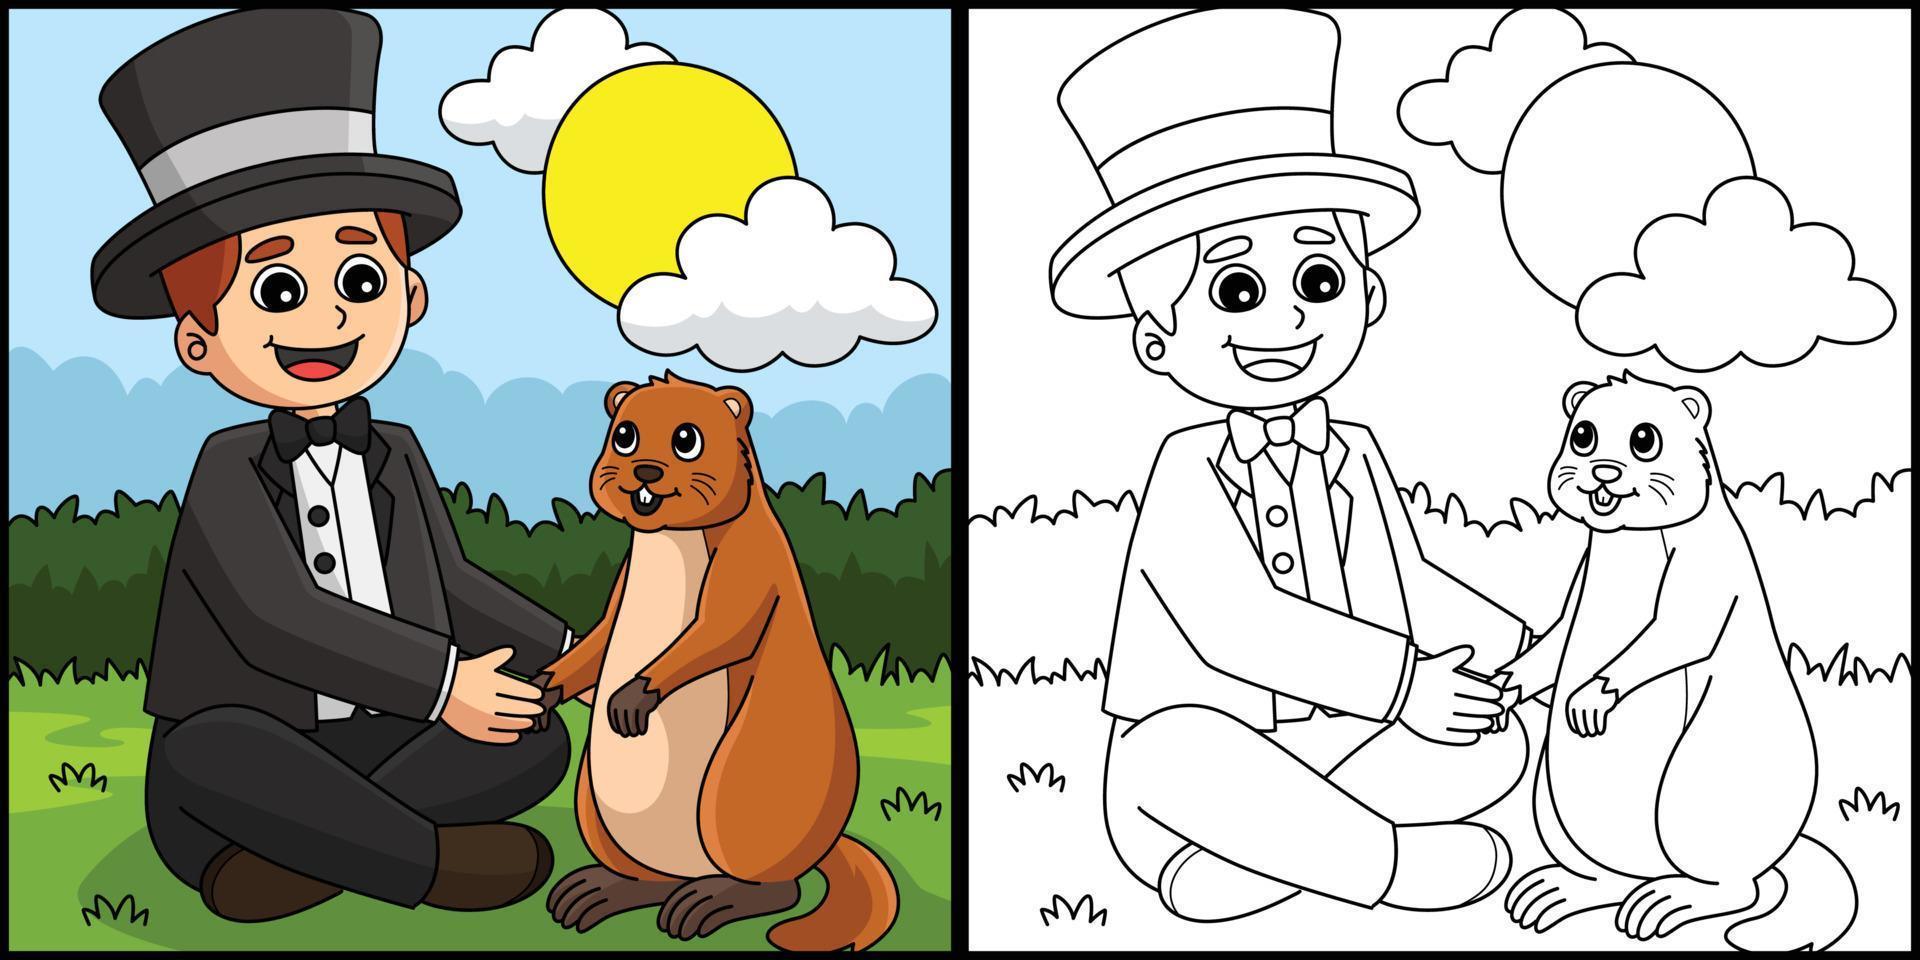 Man Holding Groundhog Coloring Page Illustration vector